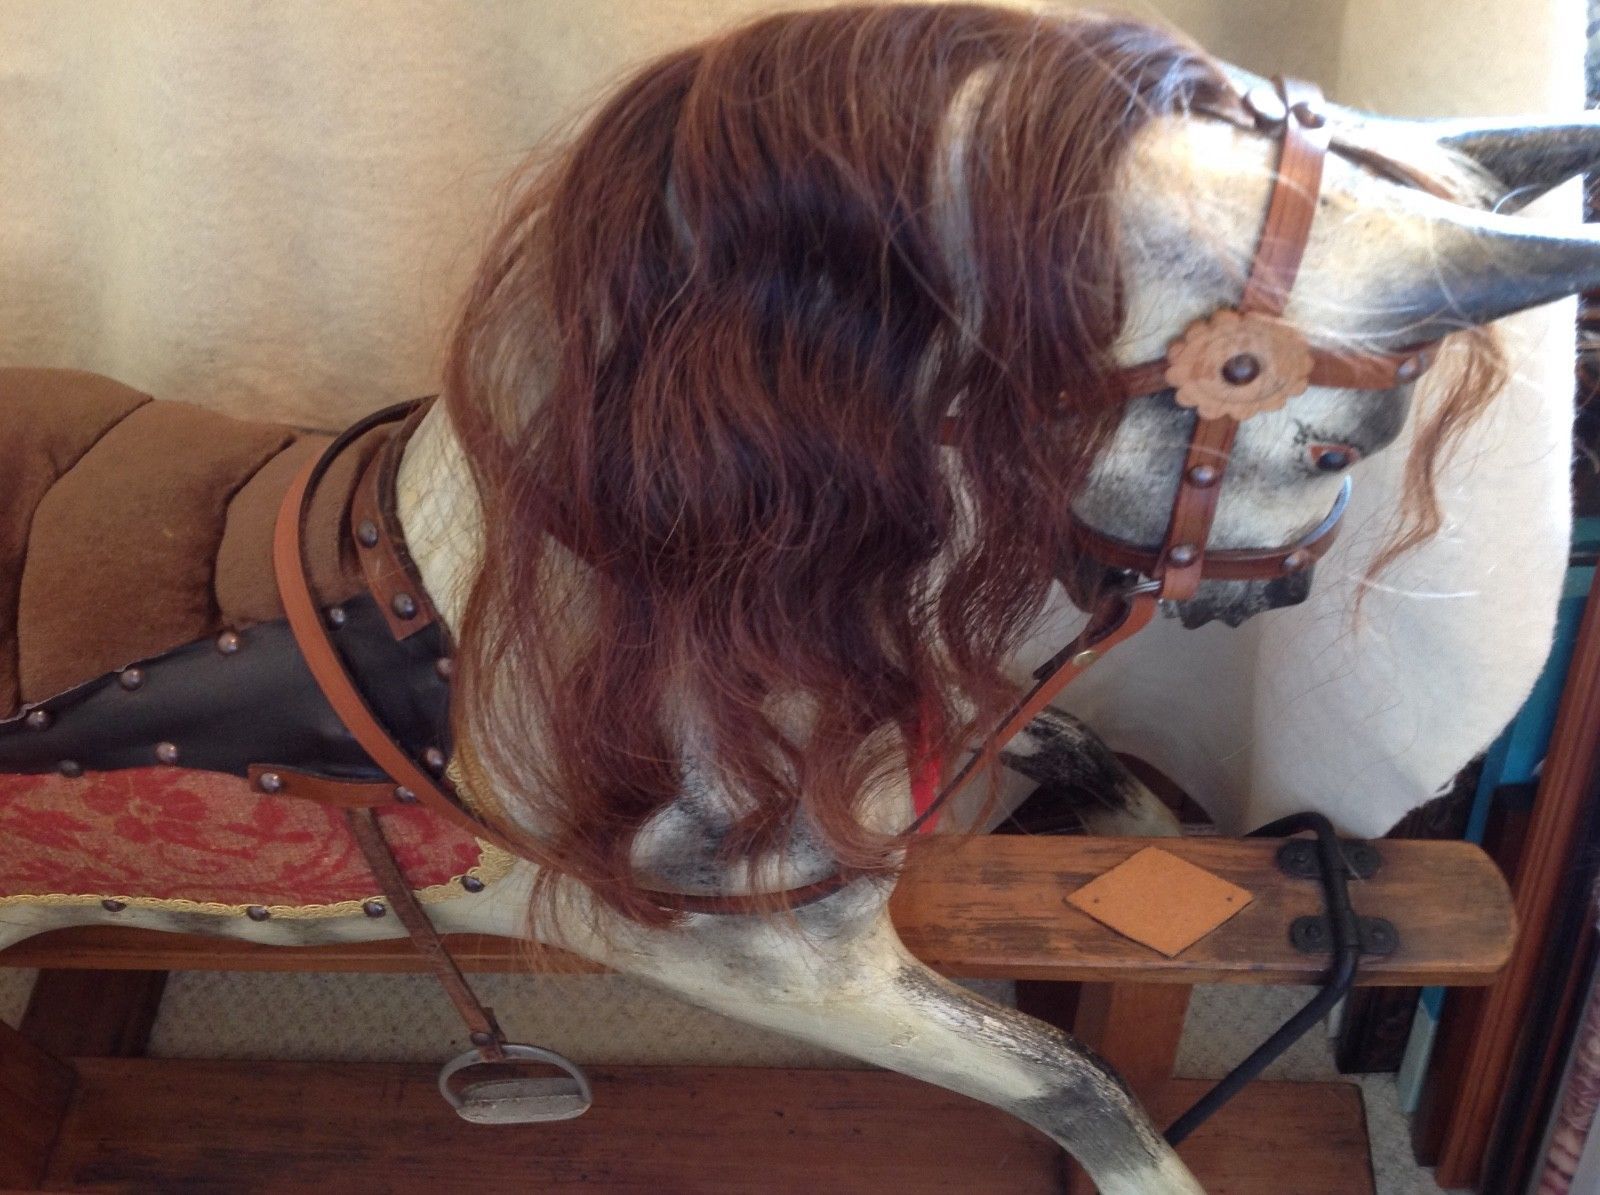 Collinsons rocking horse for sale restored